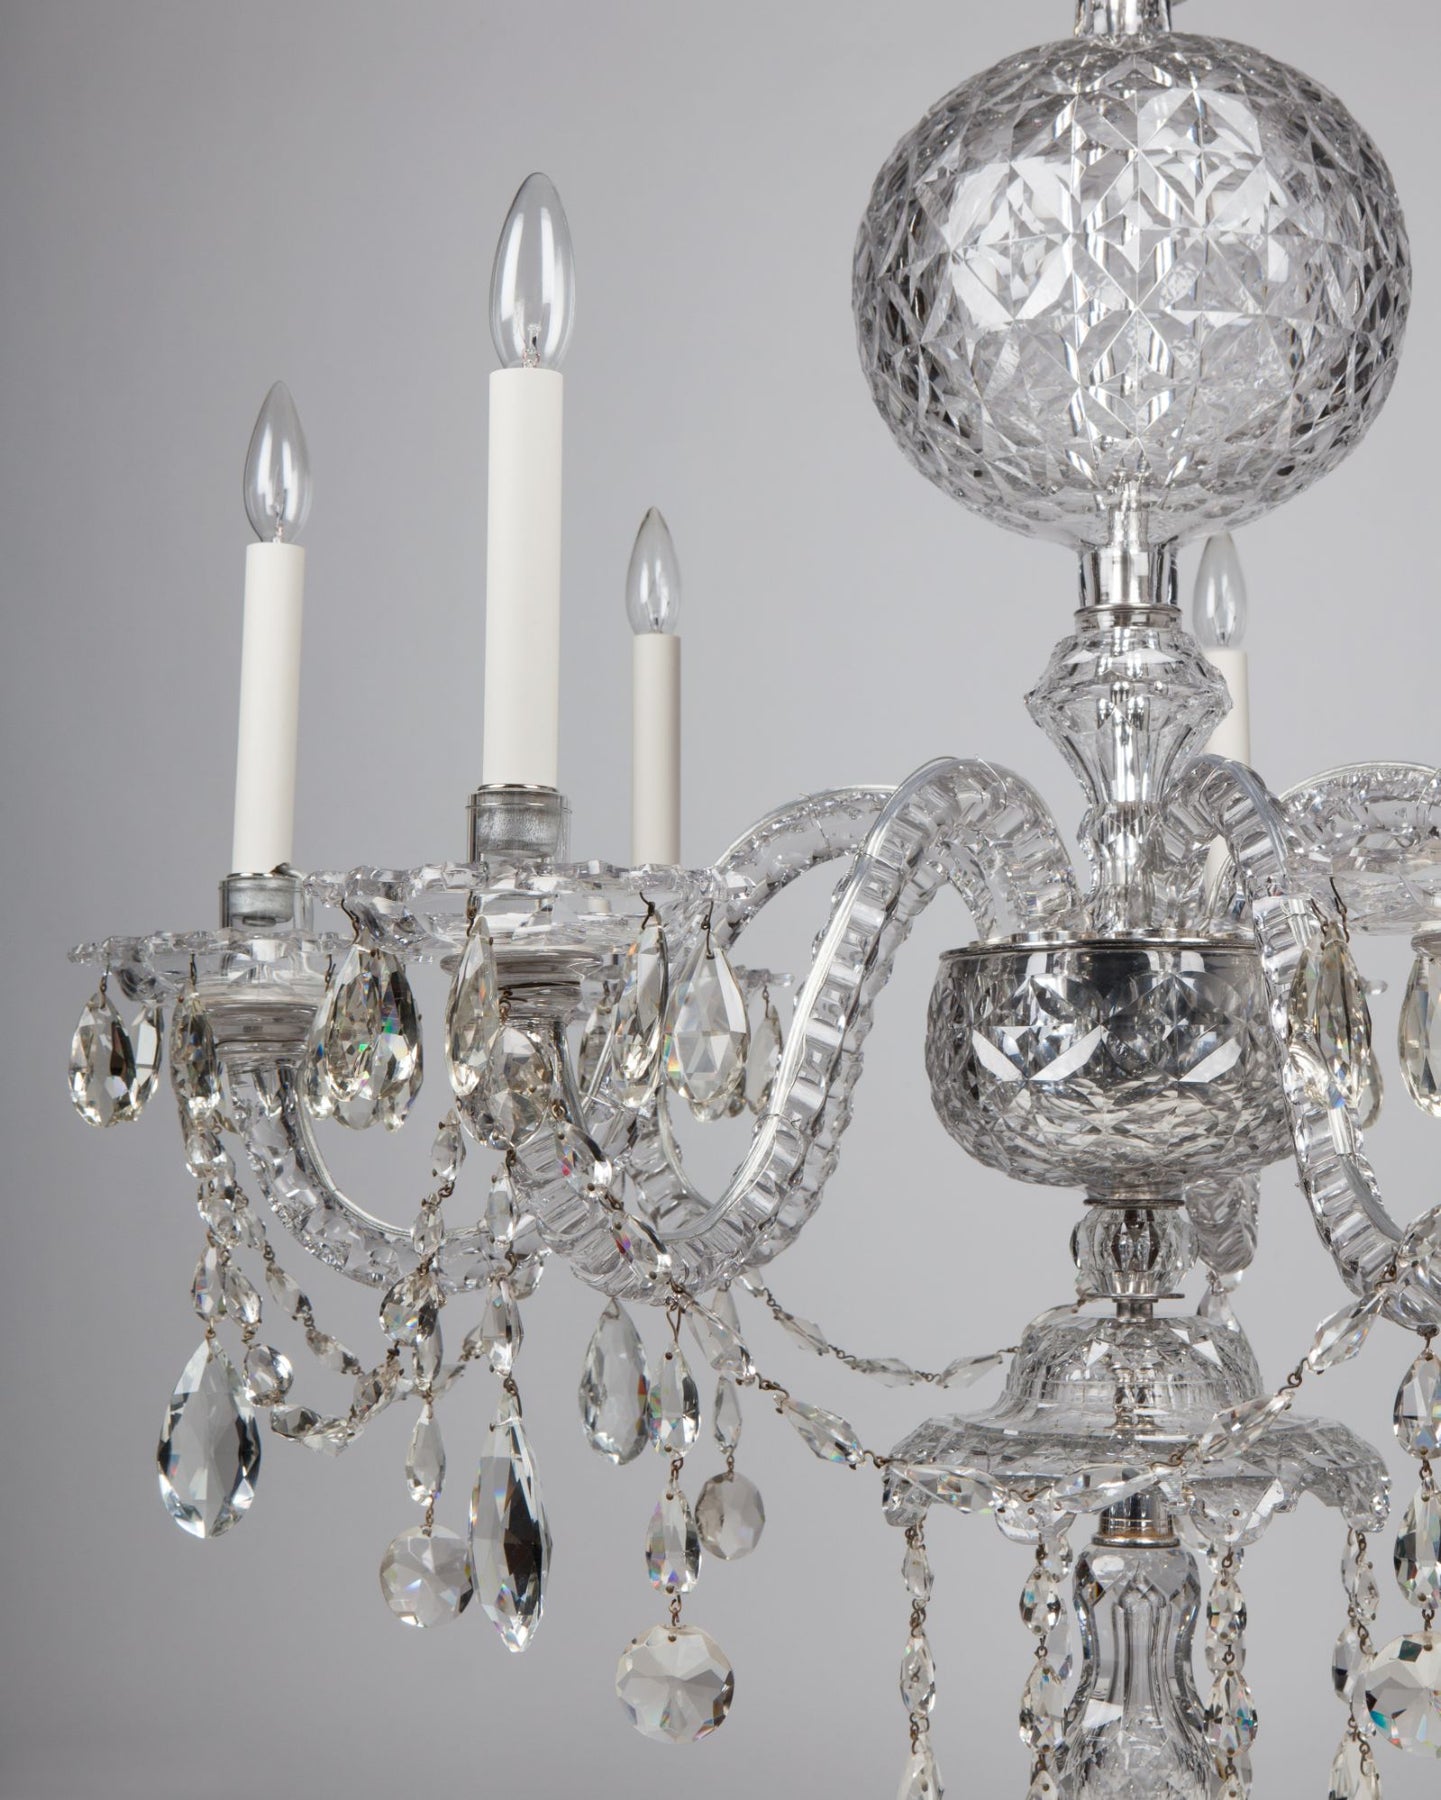 Georgian Style Brass and White Ceramic Eight-Arms Chandelier For